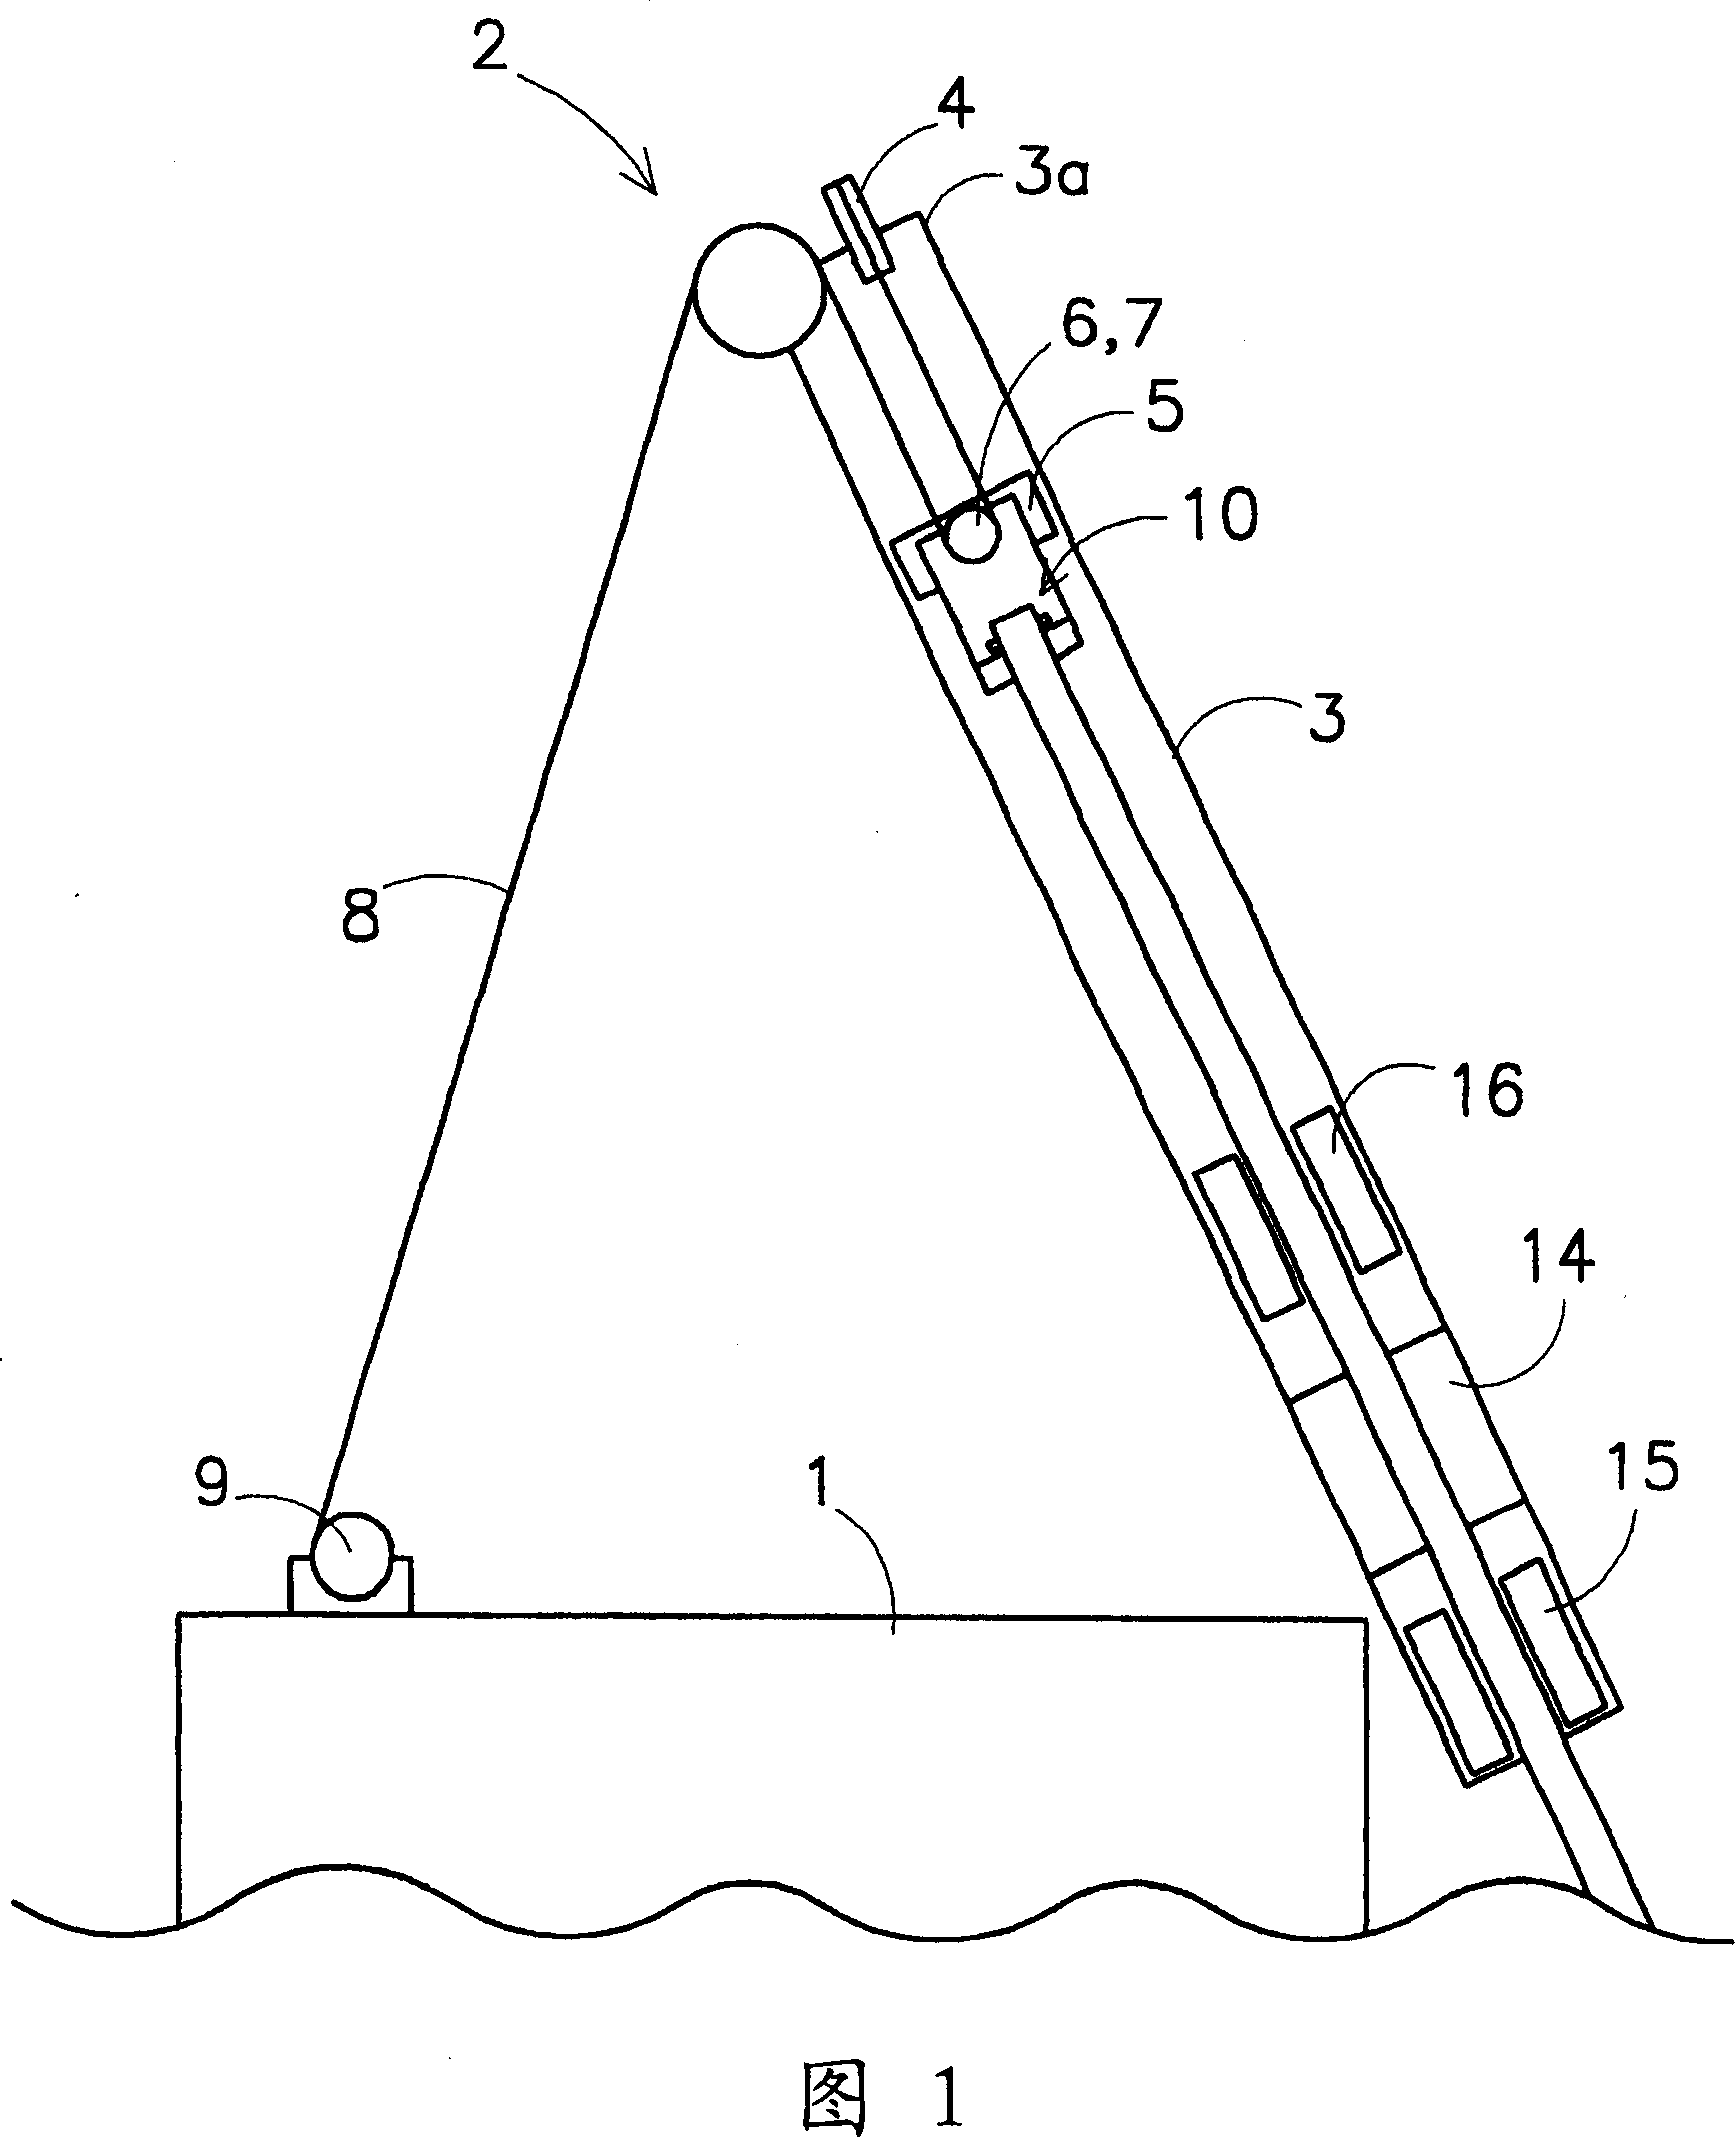 Marine pipe laying system method and hoisting device